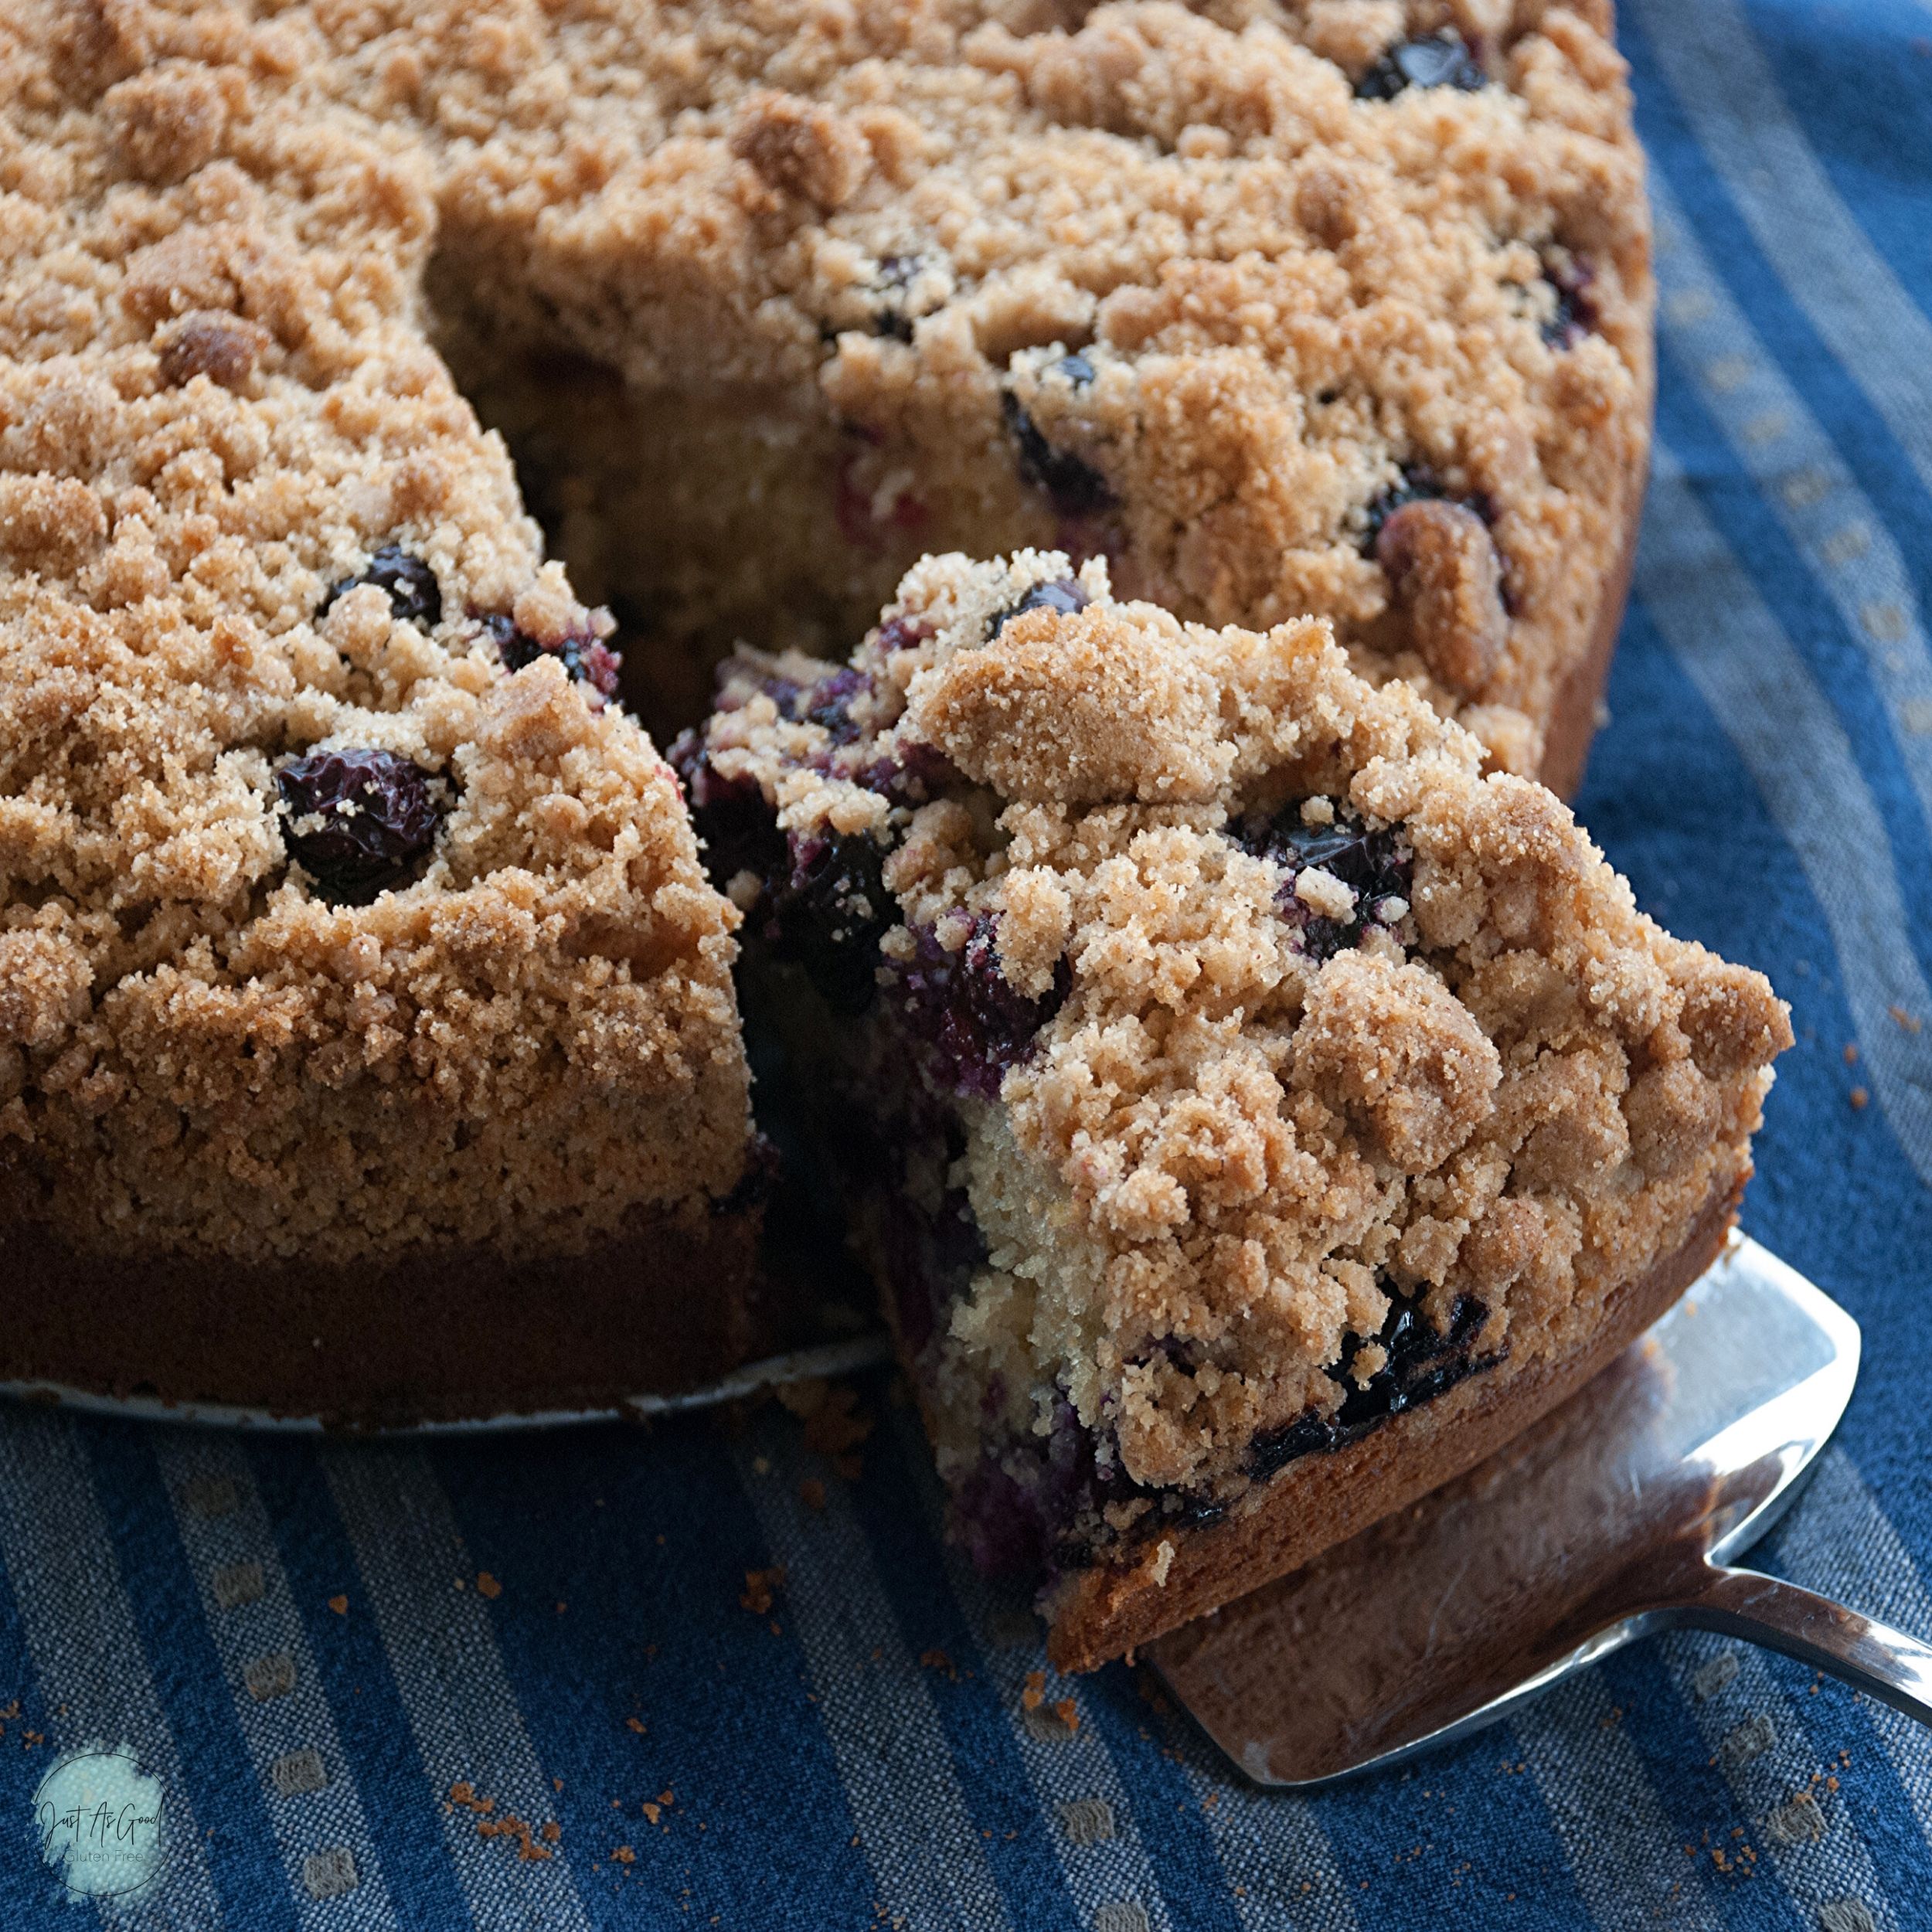 Delicious and colorful gluten-free berry cake